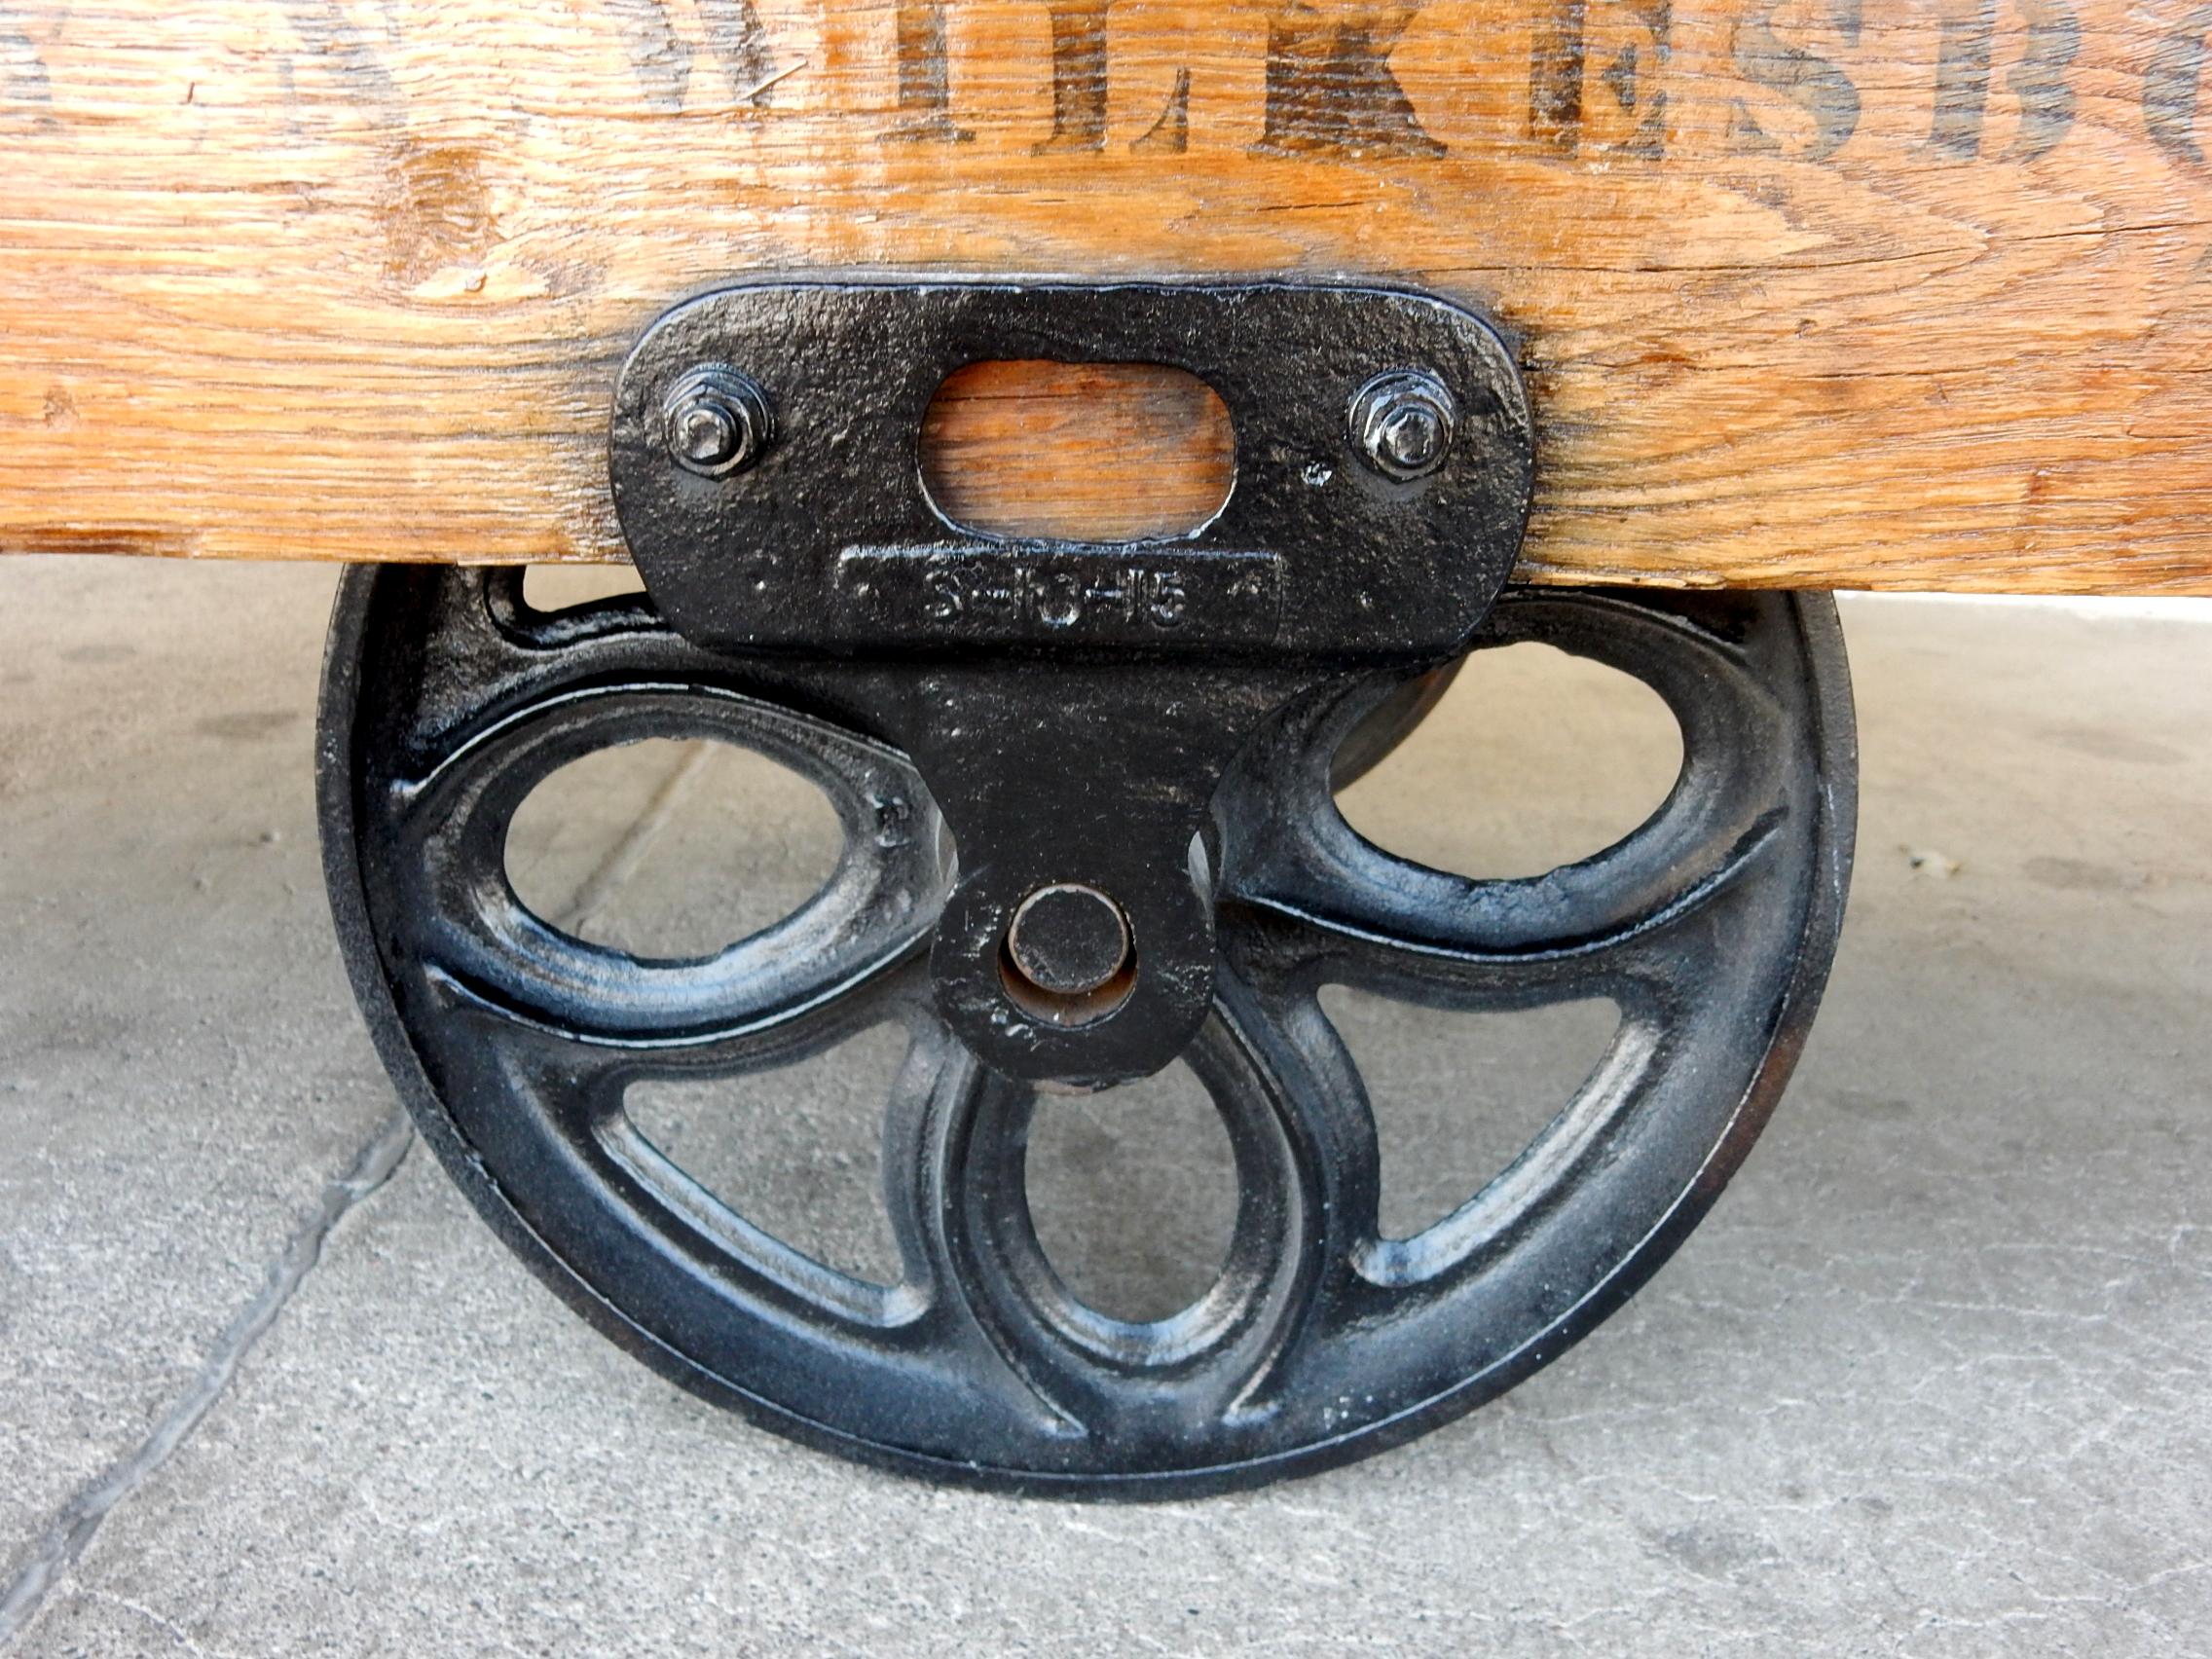 industrial cart coffee table